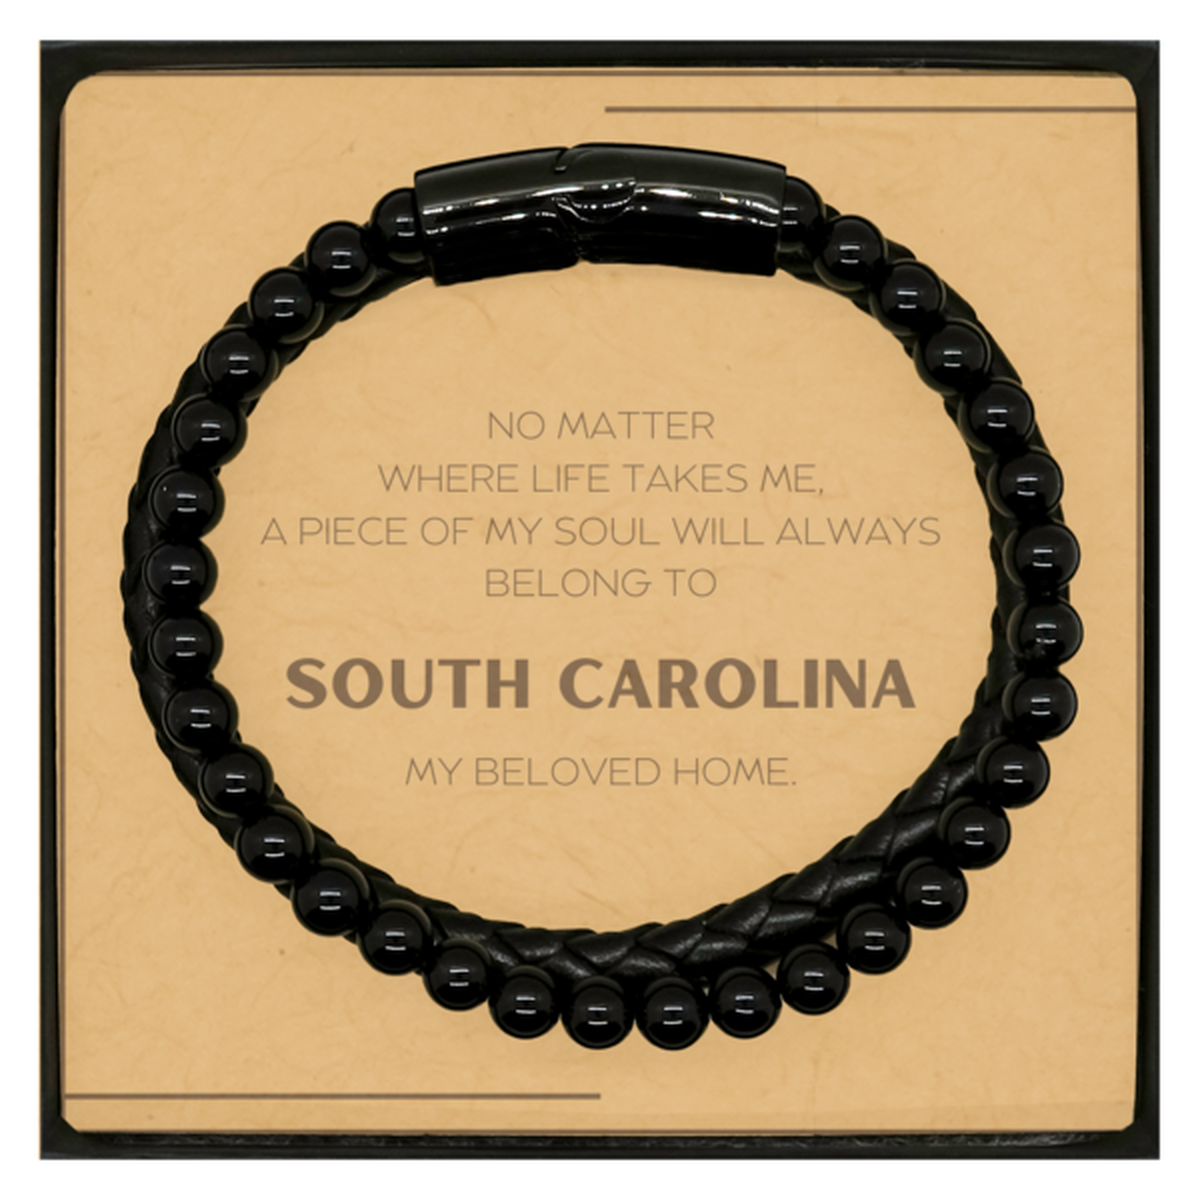 Love South Carolina State Gifts, My soul will always belong to South Carolina, Proud Stone Leather Bracelets, Birthday Christmas Unique Gifts For South Carolina Men, Women, Friends